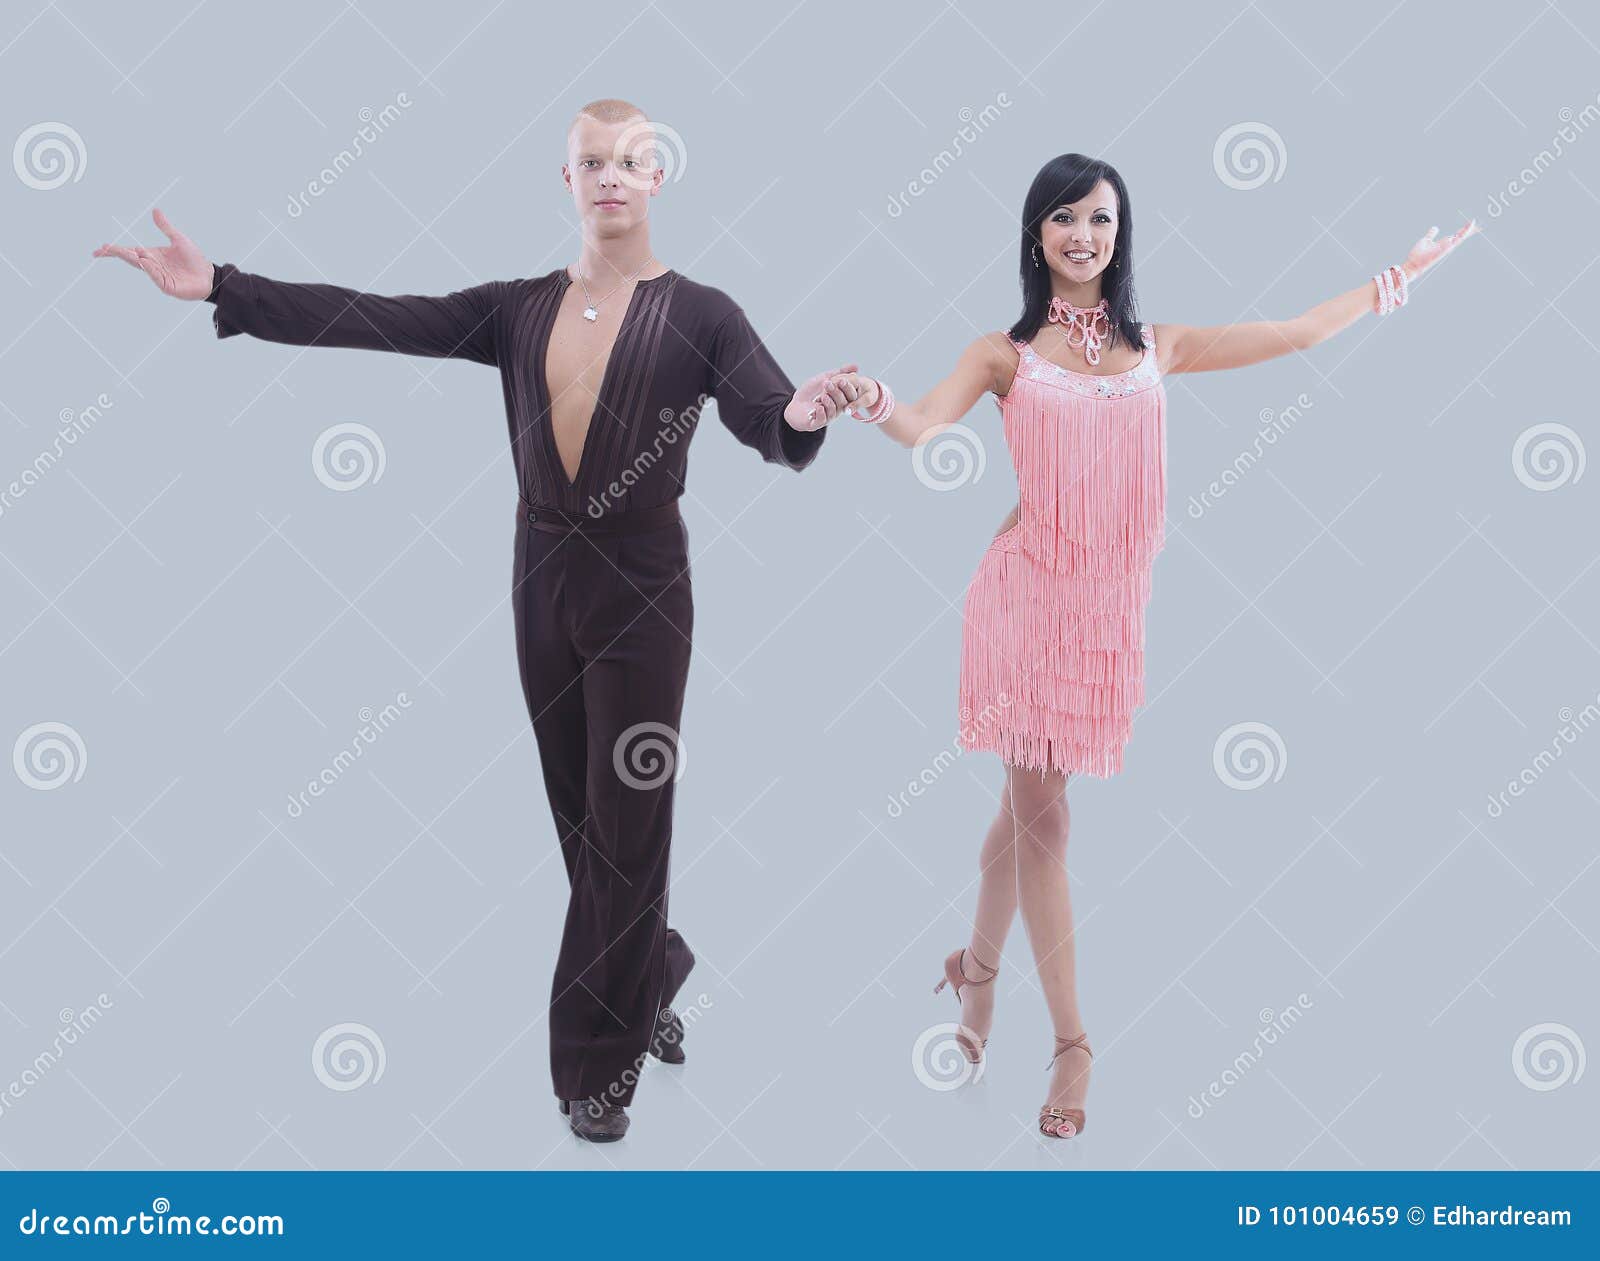 Two Young Ballroom Dancers In Studio Against Gray Background